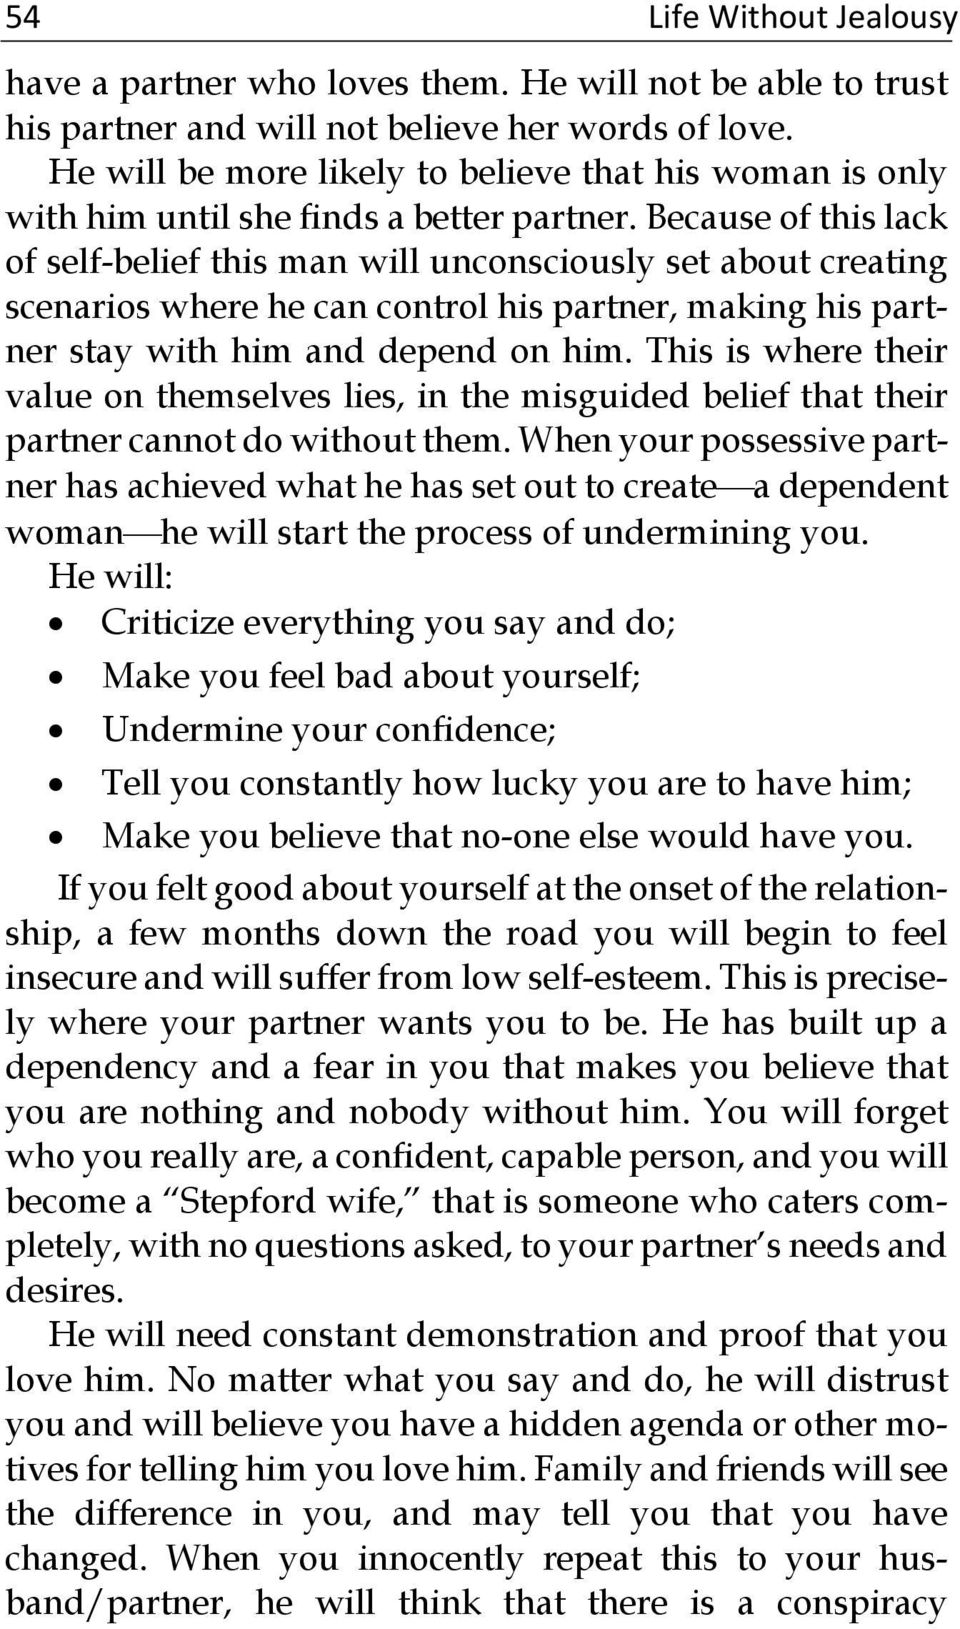 Because of this lack of self-belief this man will unconsciously set about creating scenarios where he can control his partner, making his partner stay with him and depend on him.